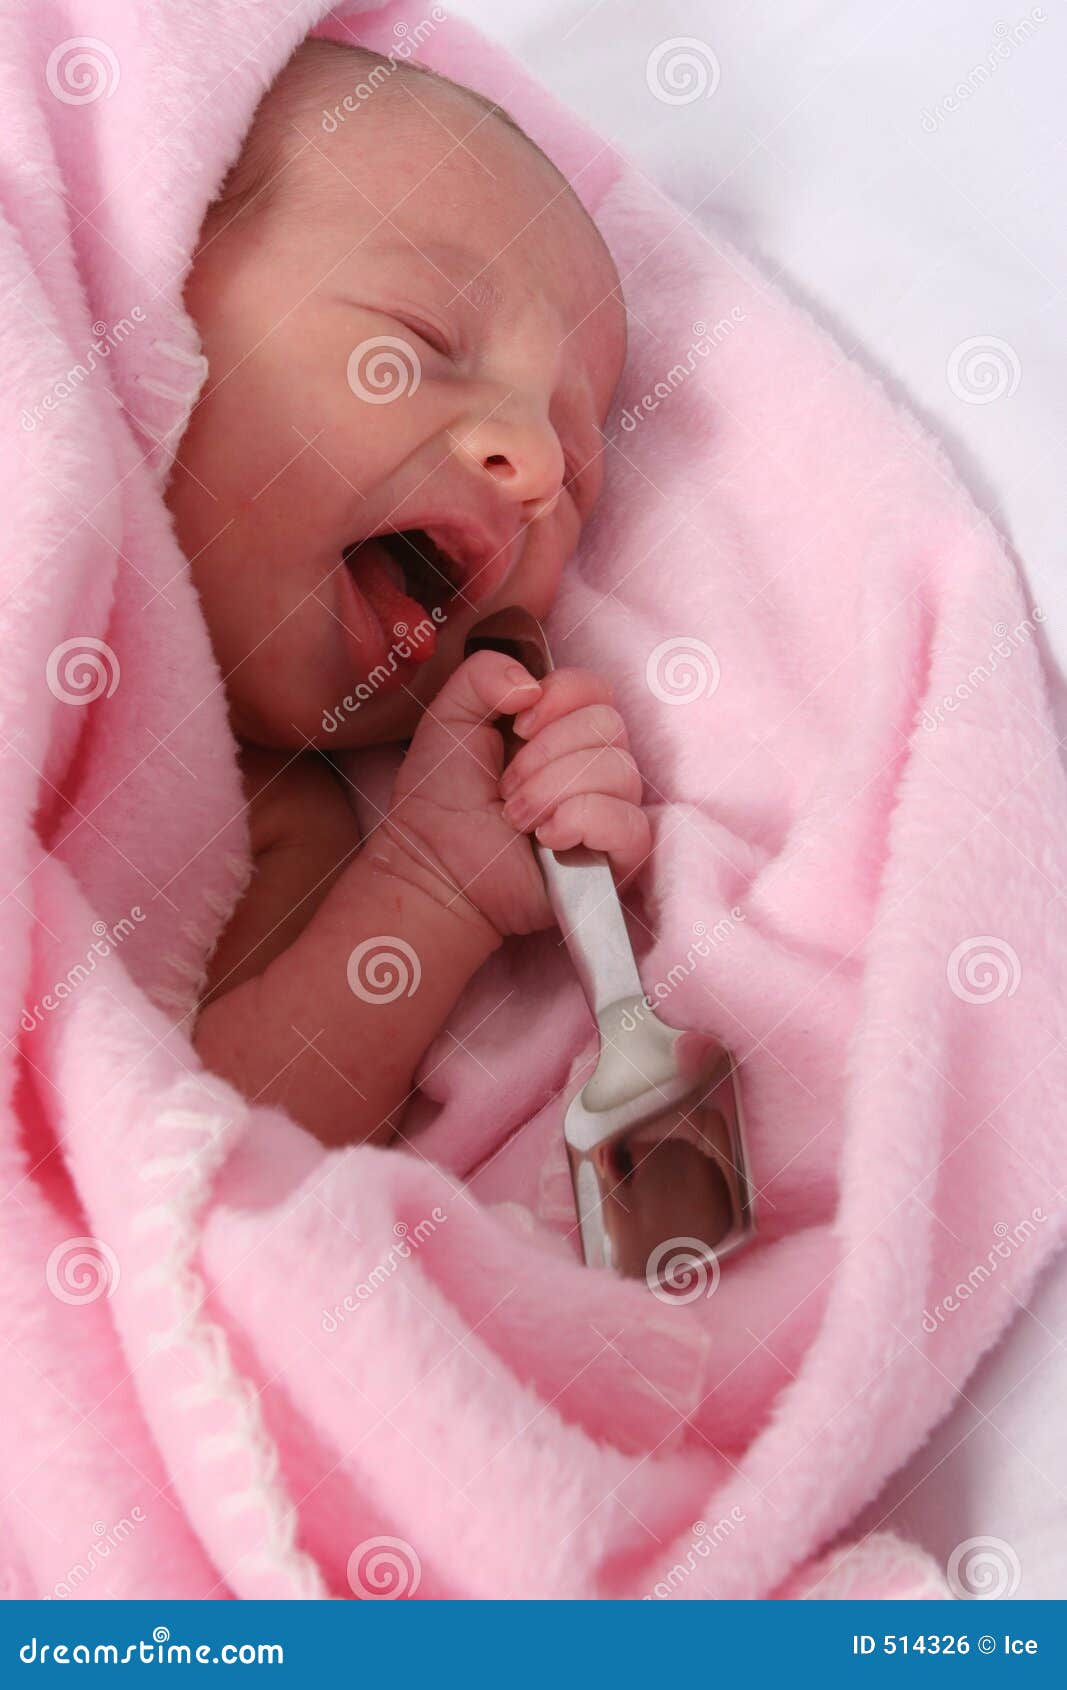 Baby Born With Silver Spoon In Her Mouth Stock Photo ...